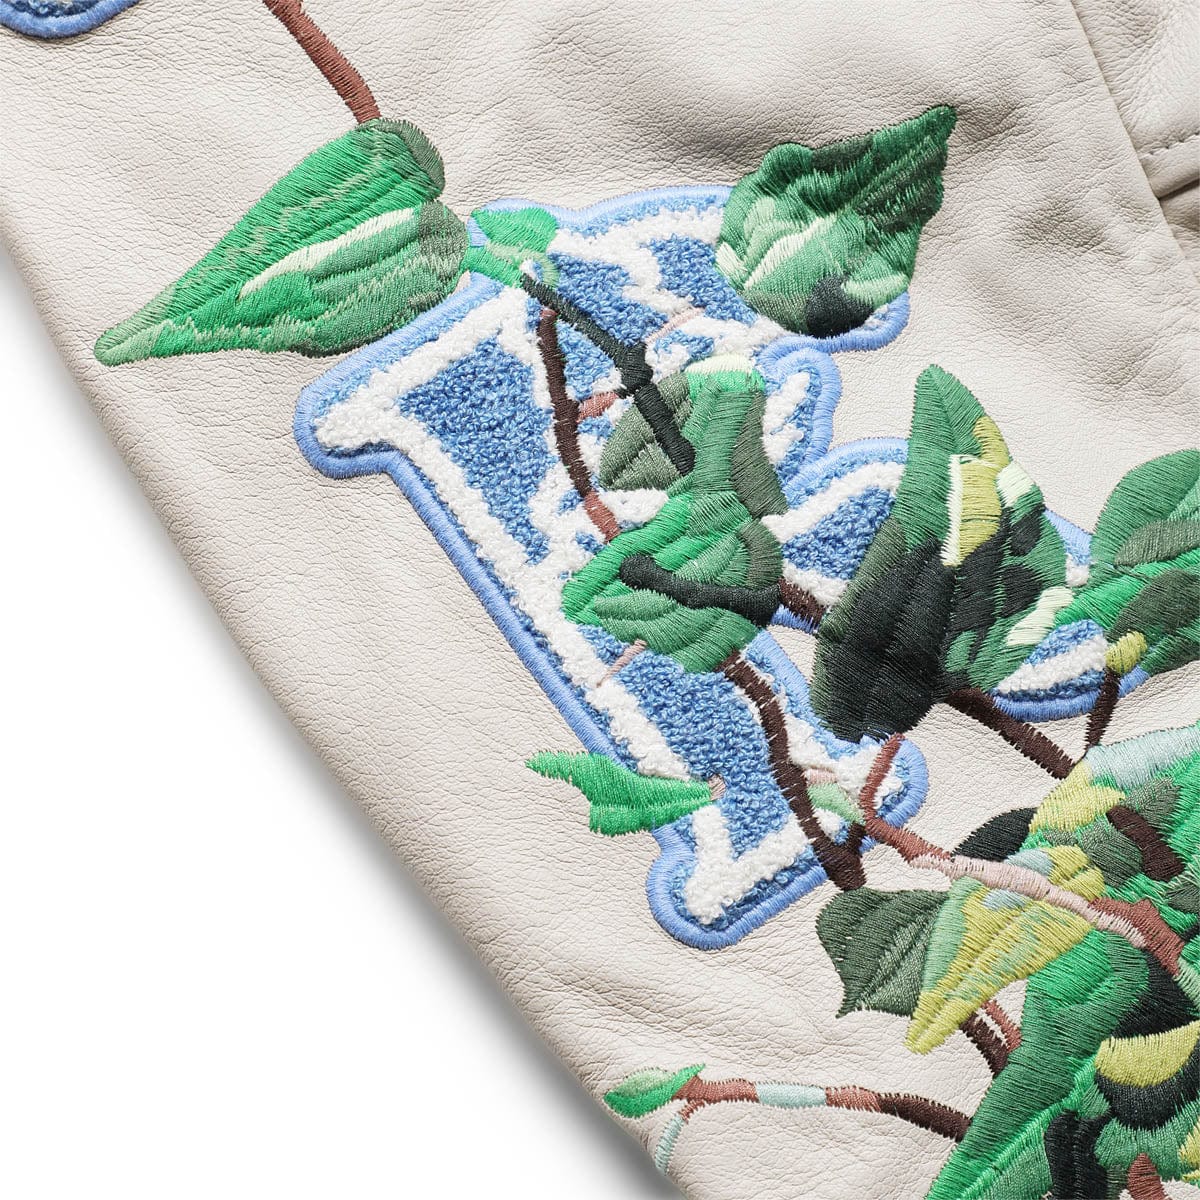 Reese Cooper Outerwear EMBROIDERED VINES VARSITY JACKET